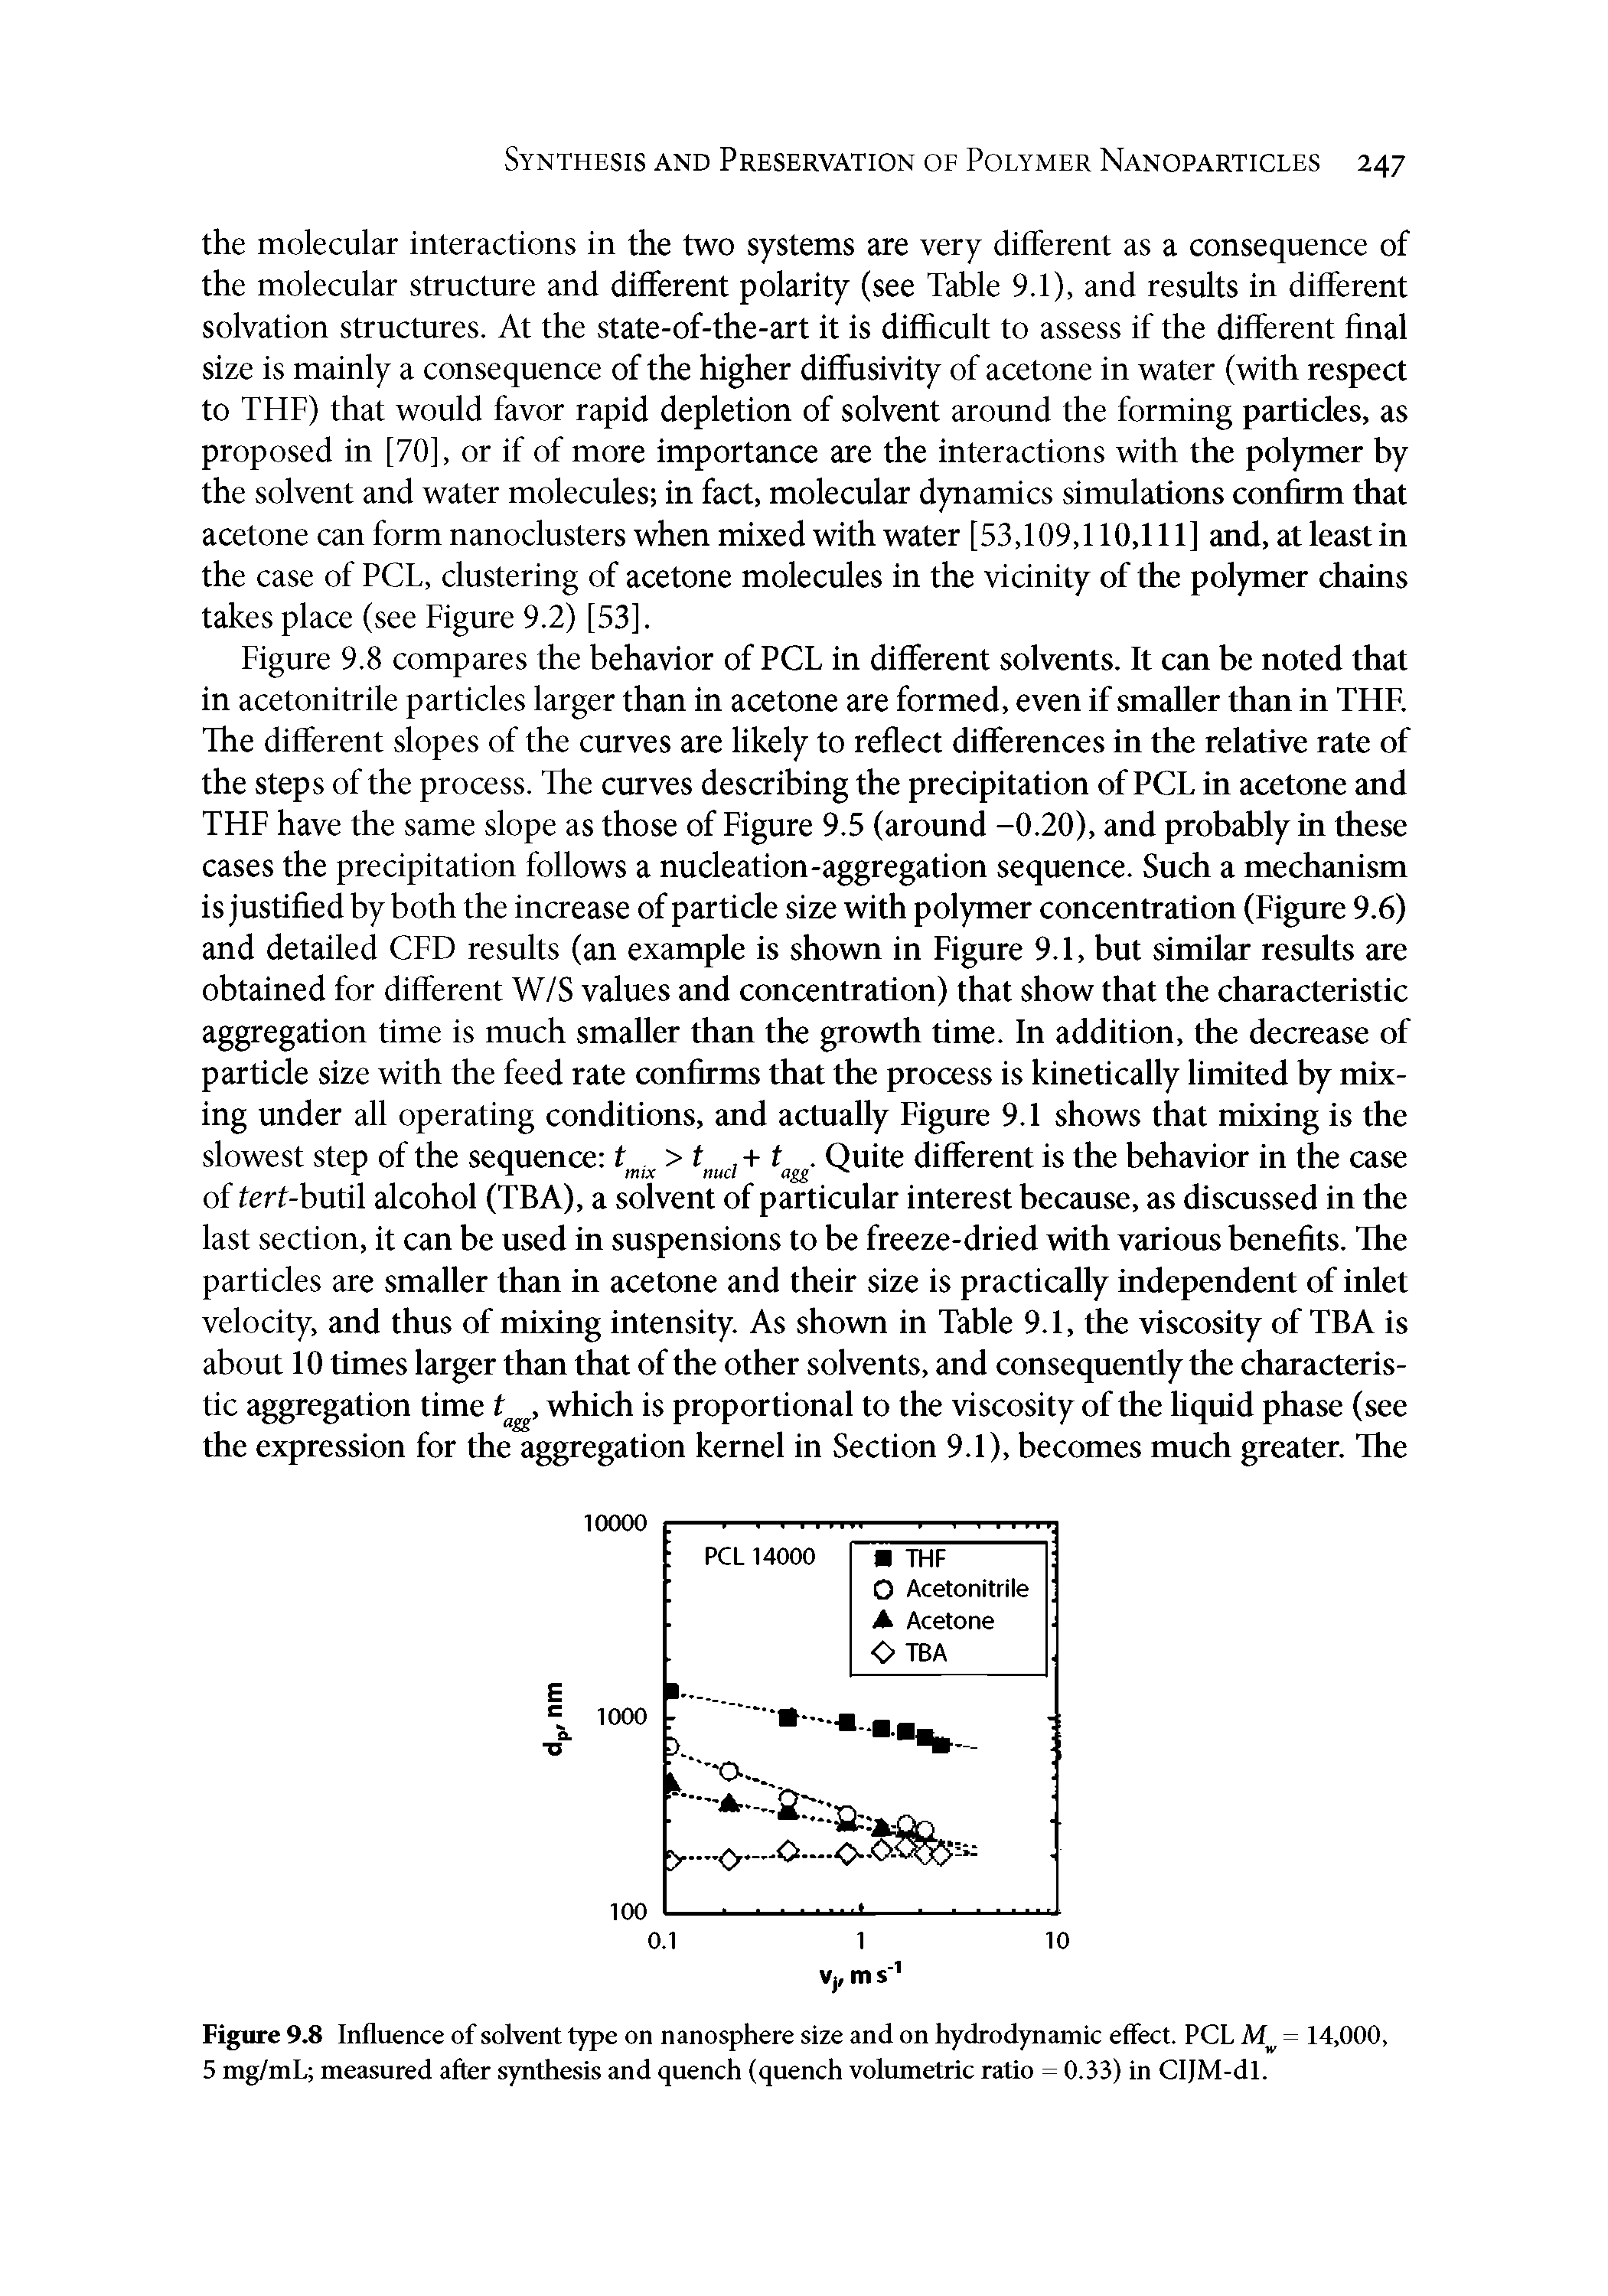 Figure 9.8 Influence of solvent type on nanosphere size and on hydrodynamic effect. PCL = 14,000, 5 mg/mL measured after synthesis and quench (quench volumetric ratio = 0.33) in CIJM-dl.